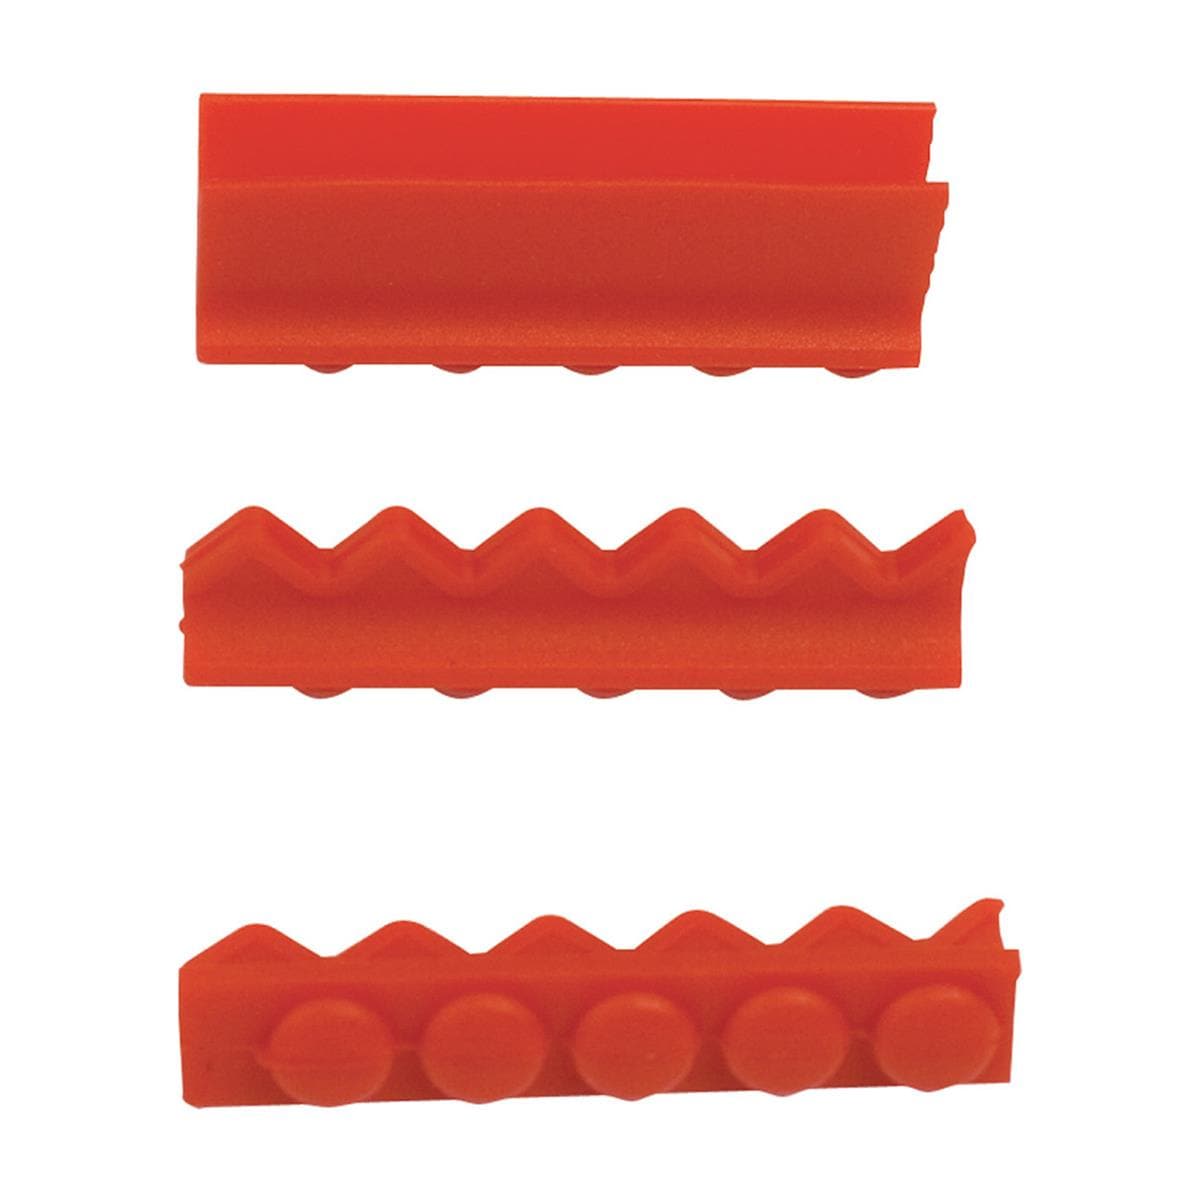 HS 5 Instrument Cassettes Silicone Rail Red 3pk